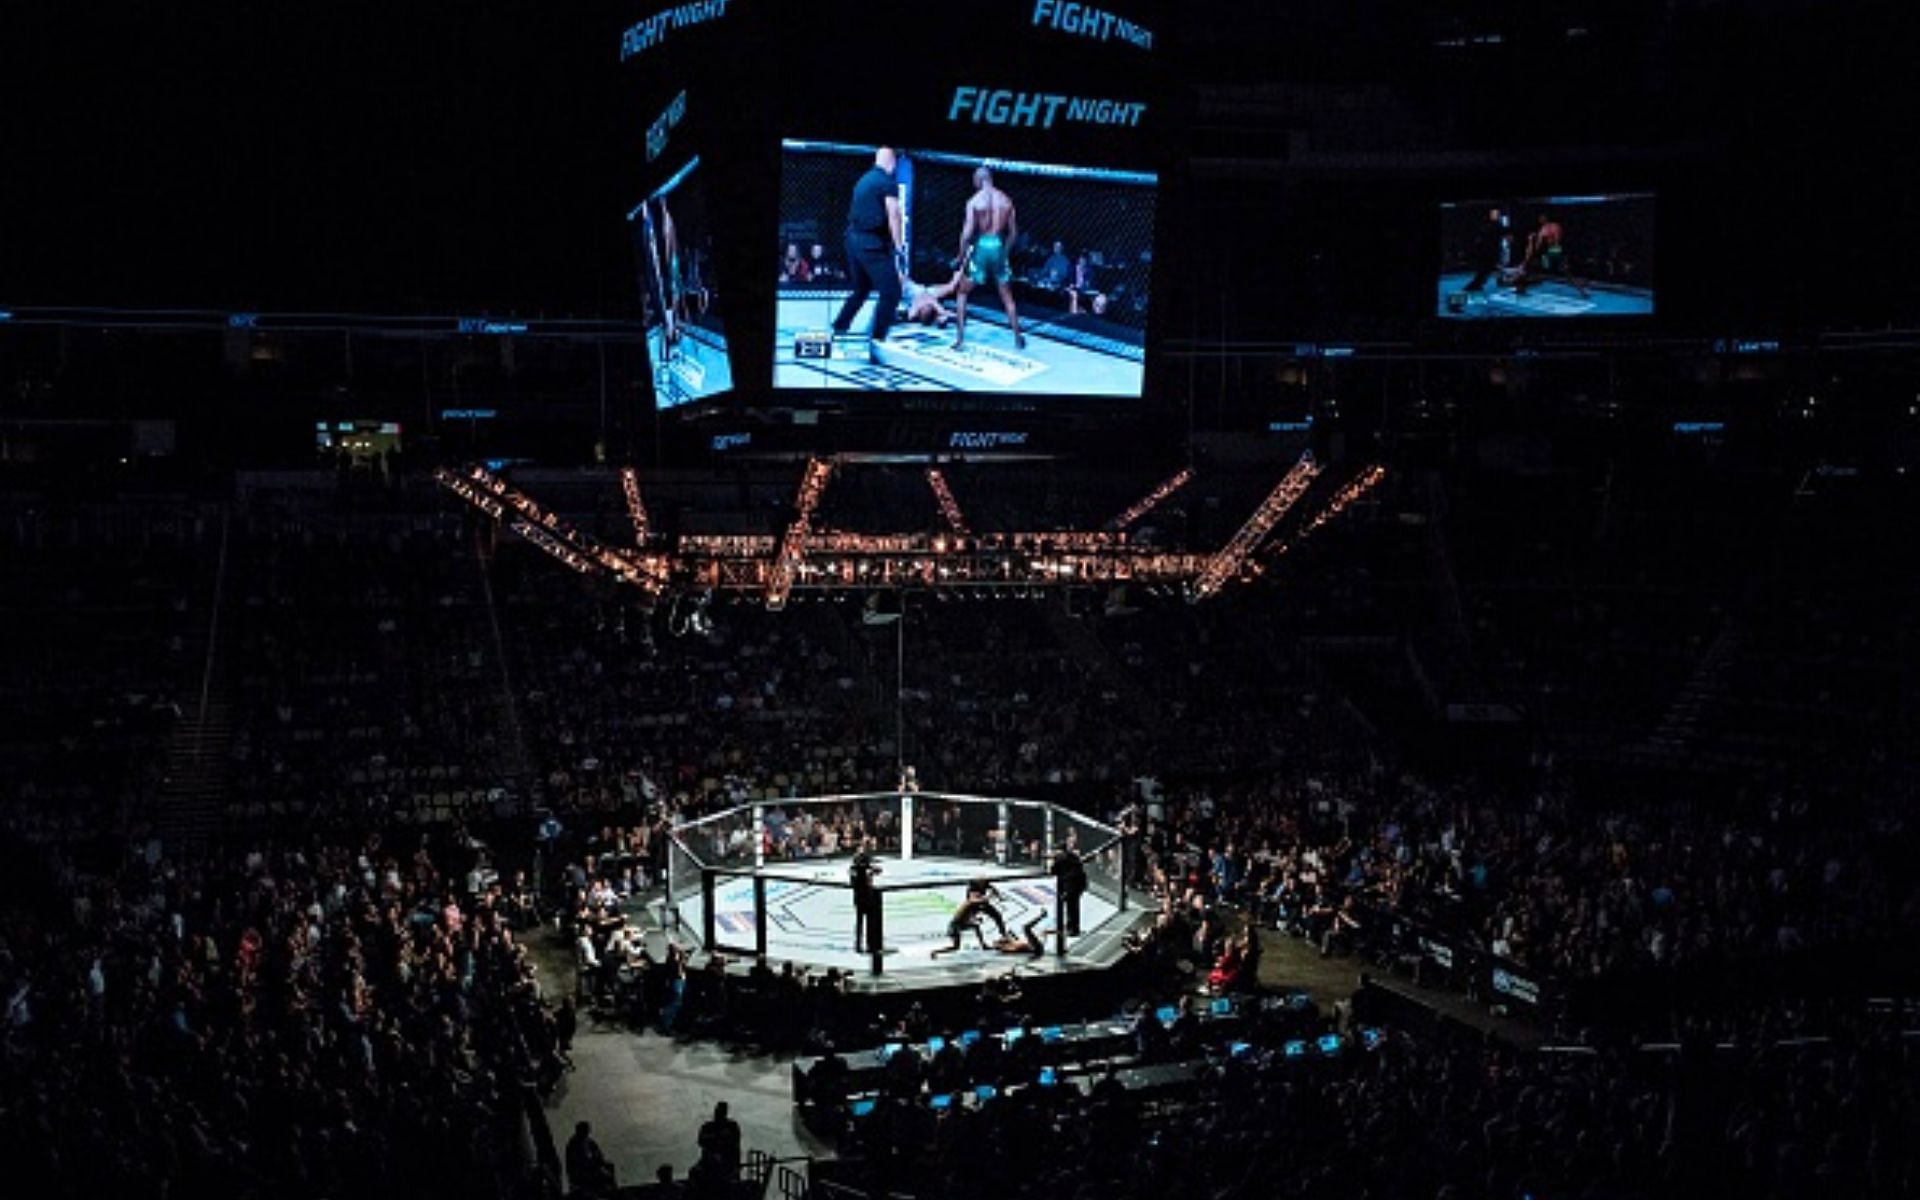 UFC Fight Night [Image courtesy: Getty Images]